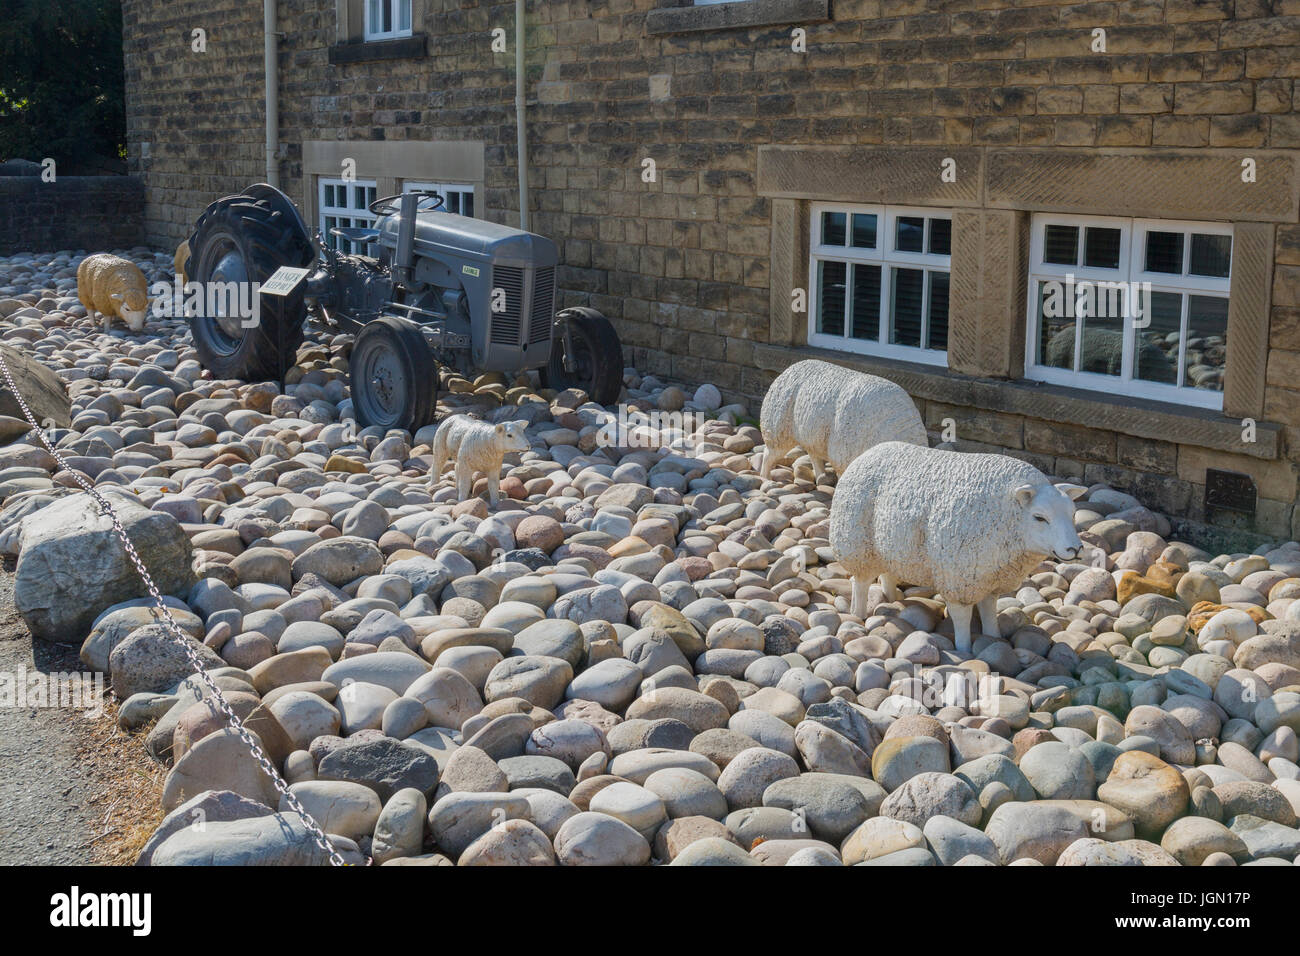 Ornamental sheep and a vintage grey Ferguson tractor outside The George Hotel in Hathersage, Peak District, Derbyshire, England, UK Stock Photo